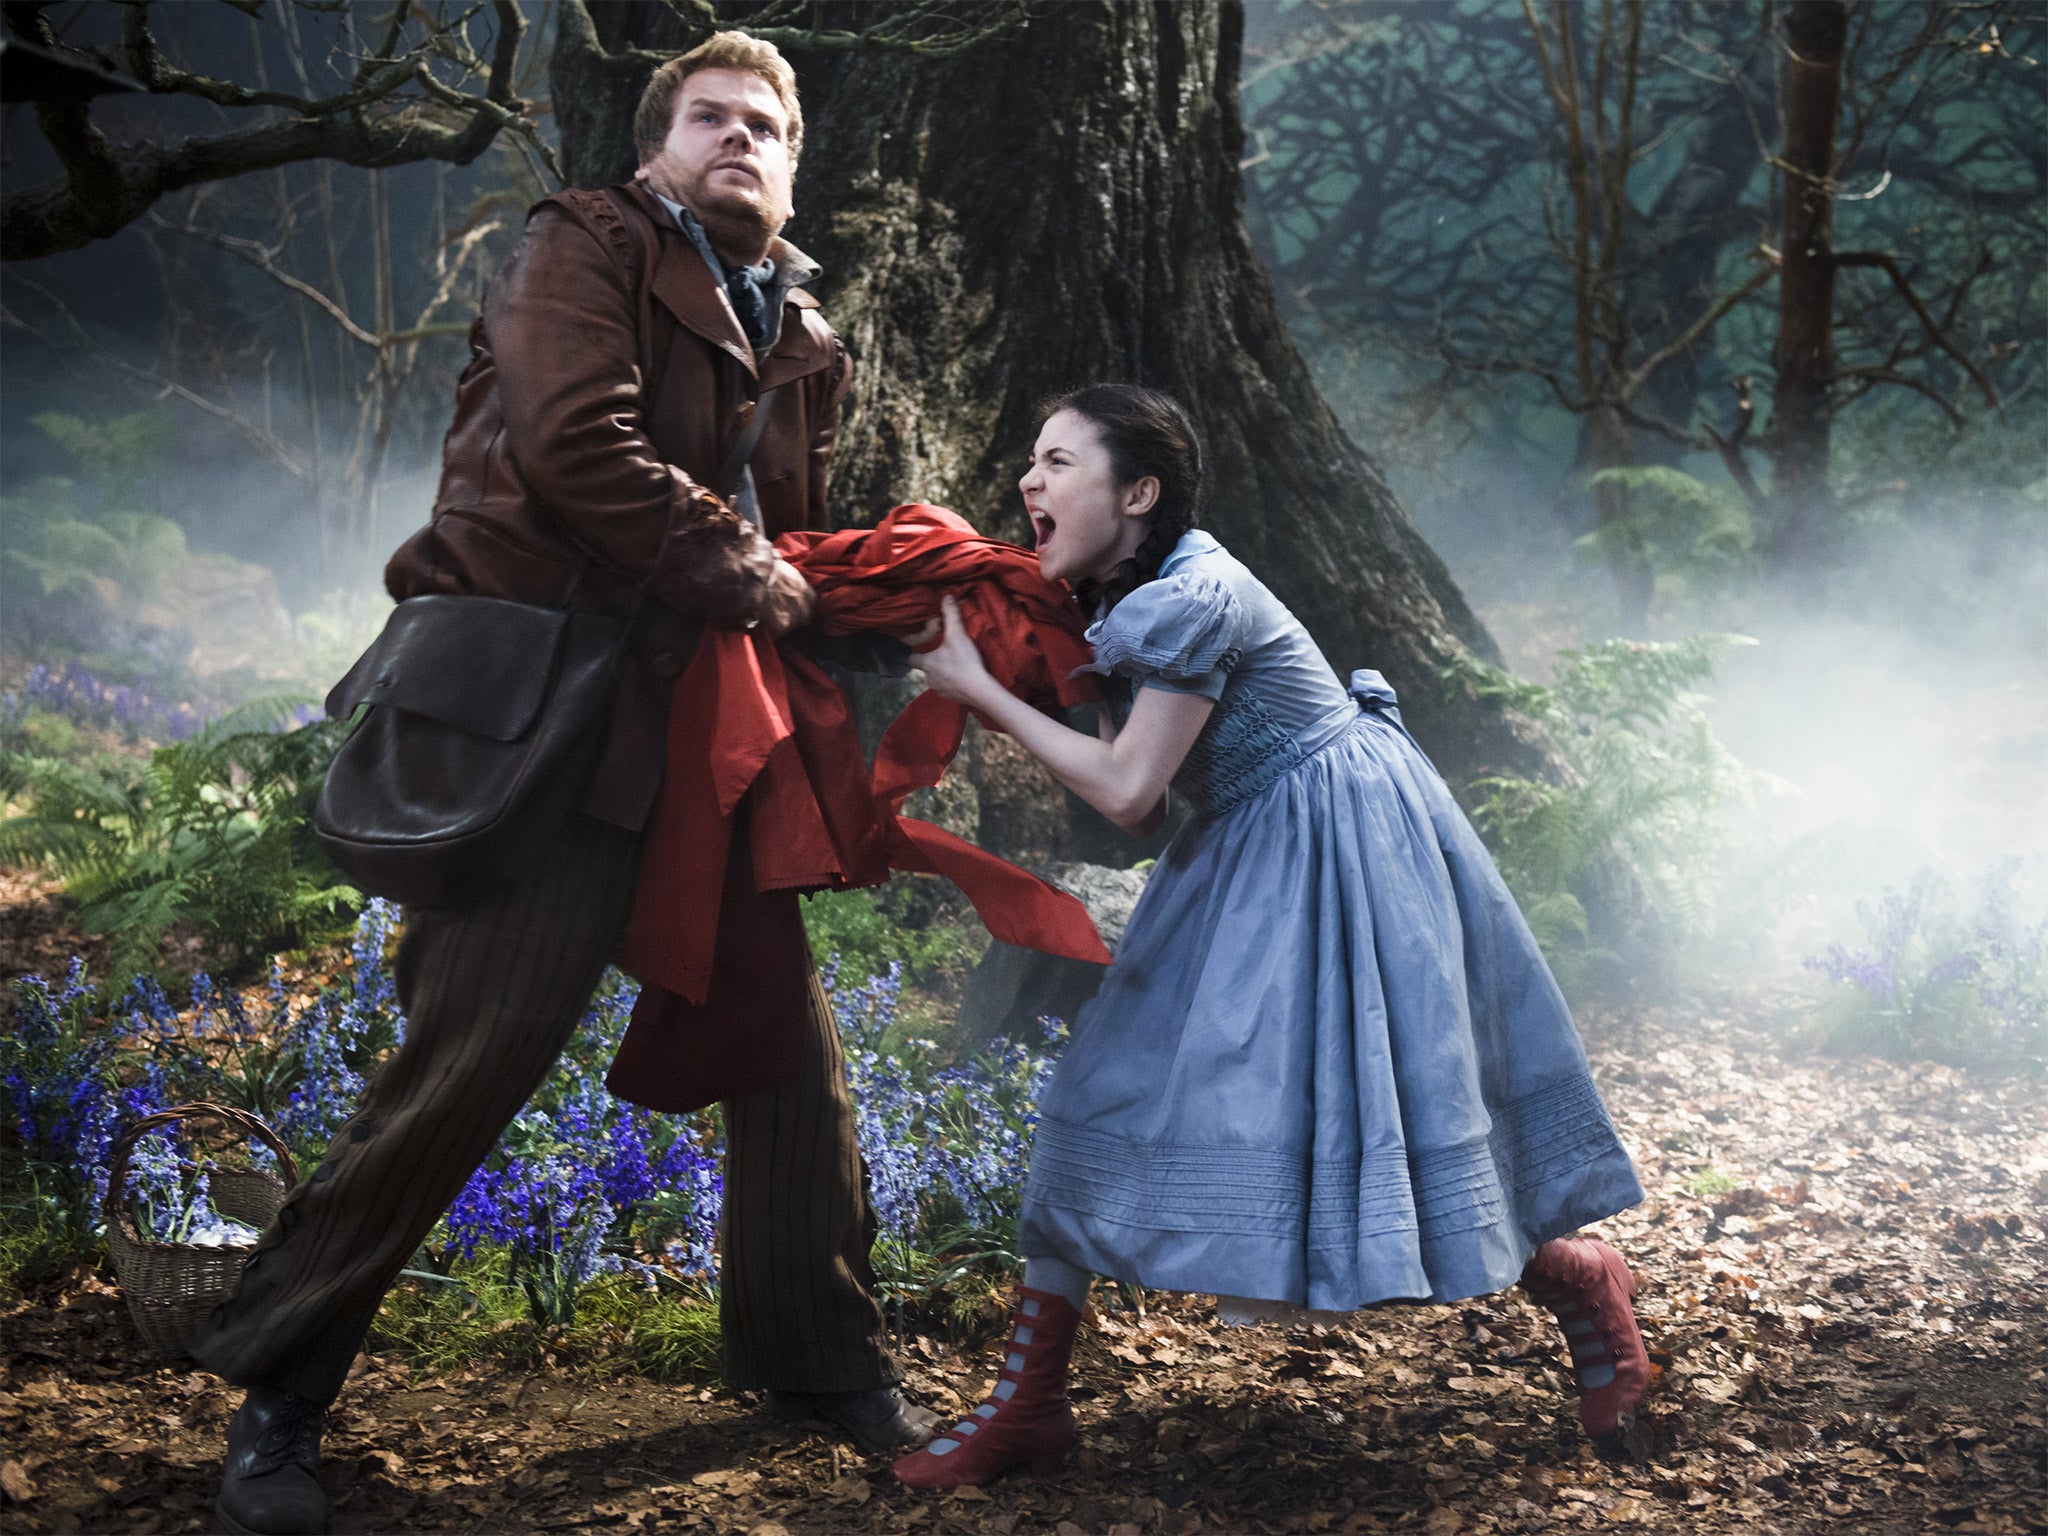 The Baker (James Corden) struggles with Lilla Crawford’s Little Red Riding Hood